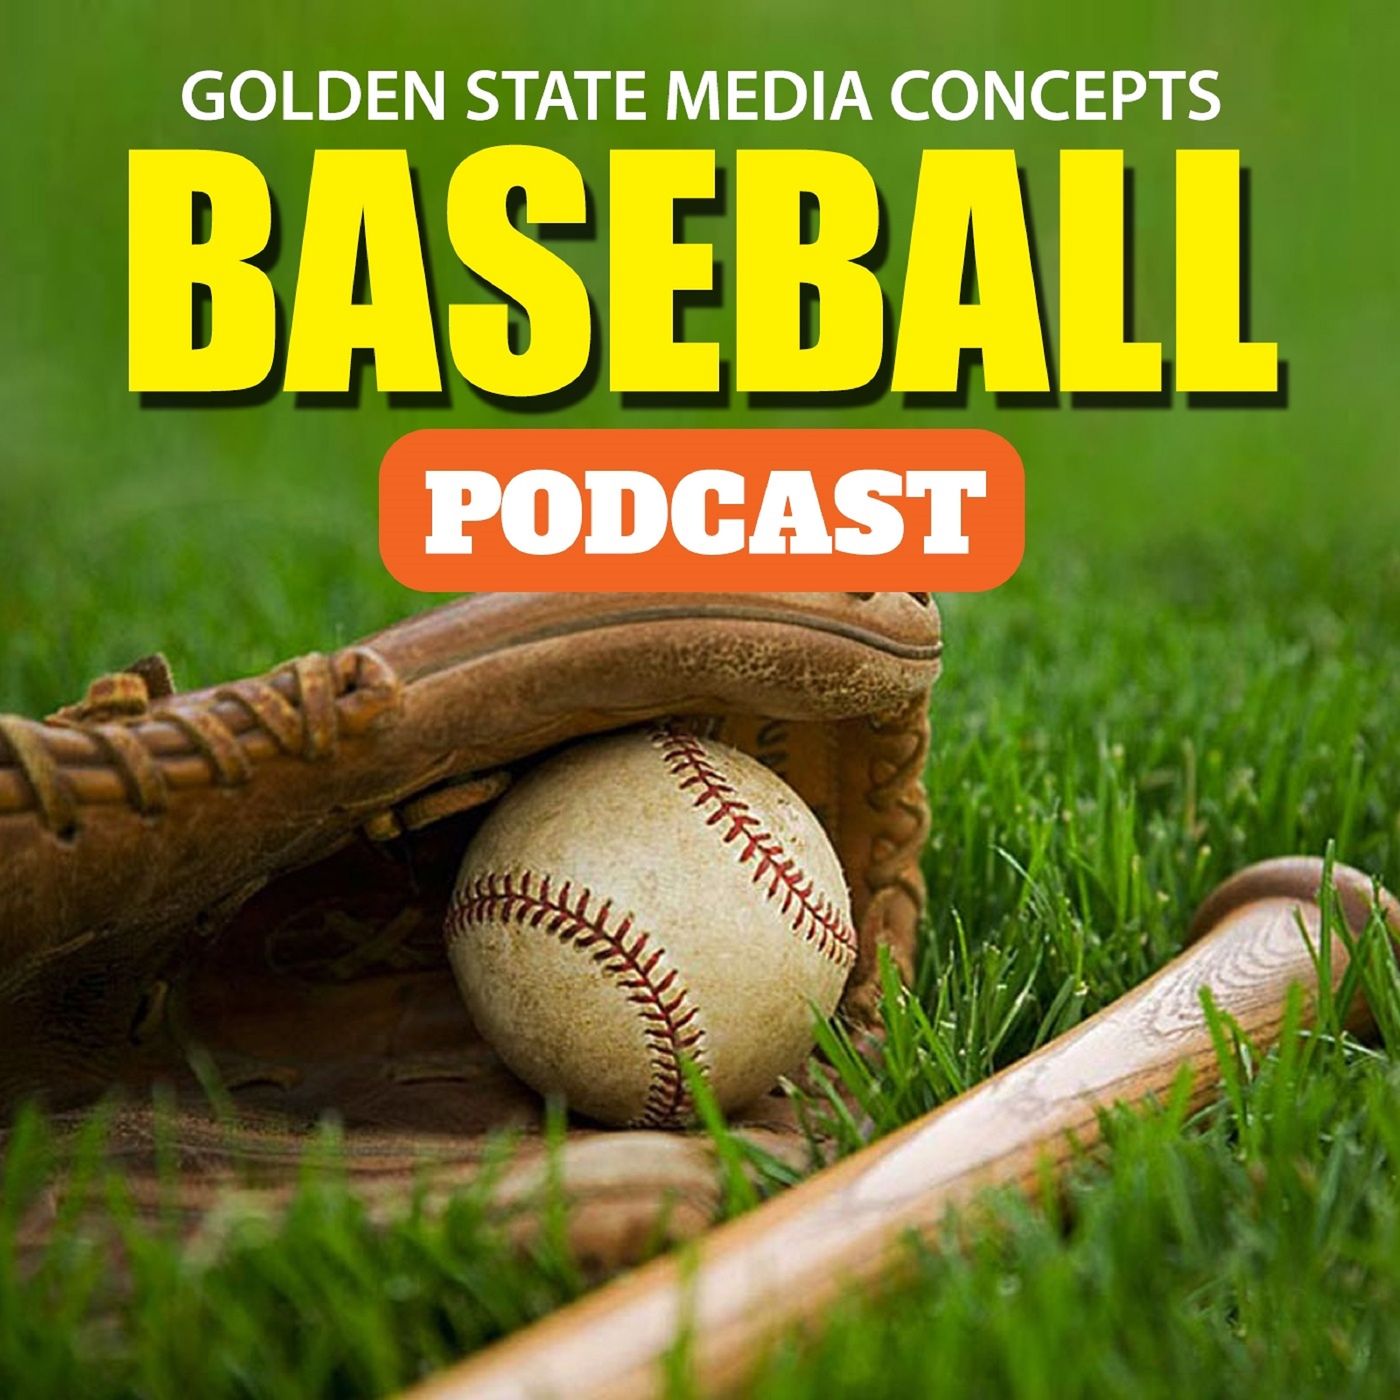 Recap of the Baseball games from yesterday, Guardians in first place? | GSMC Baseball Podcast